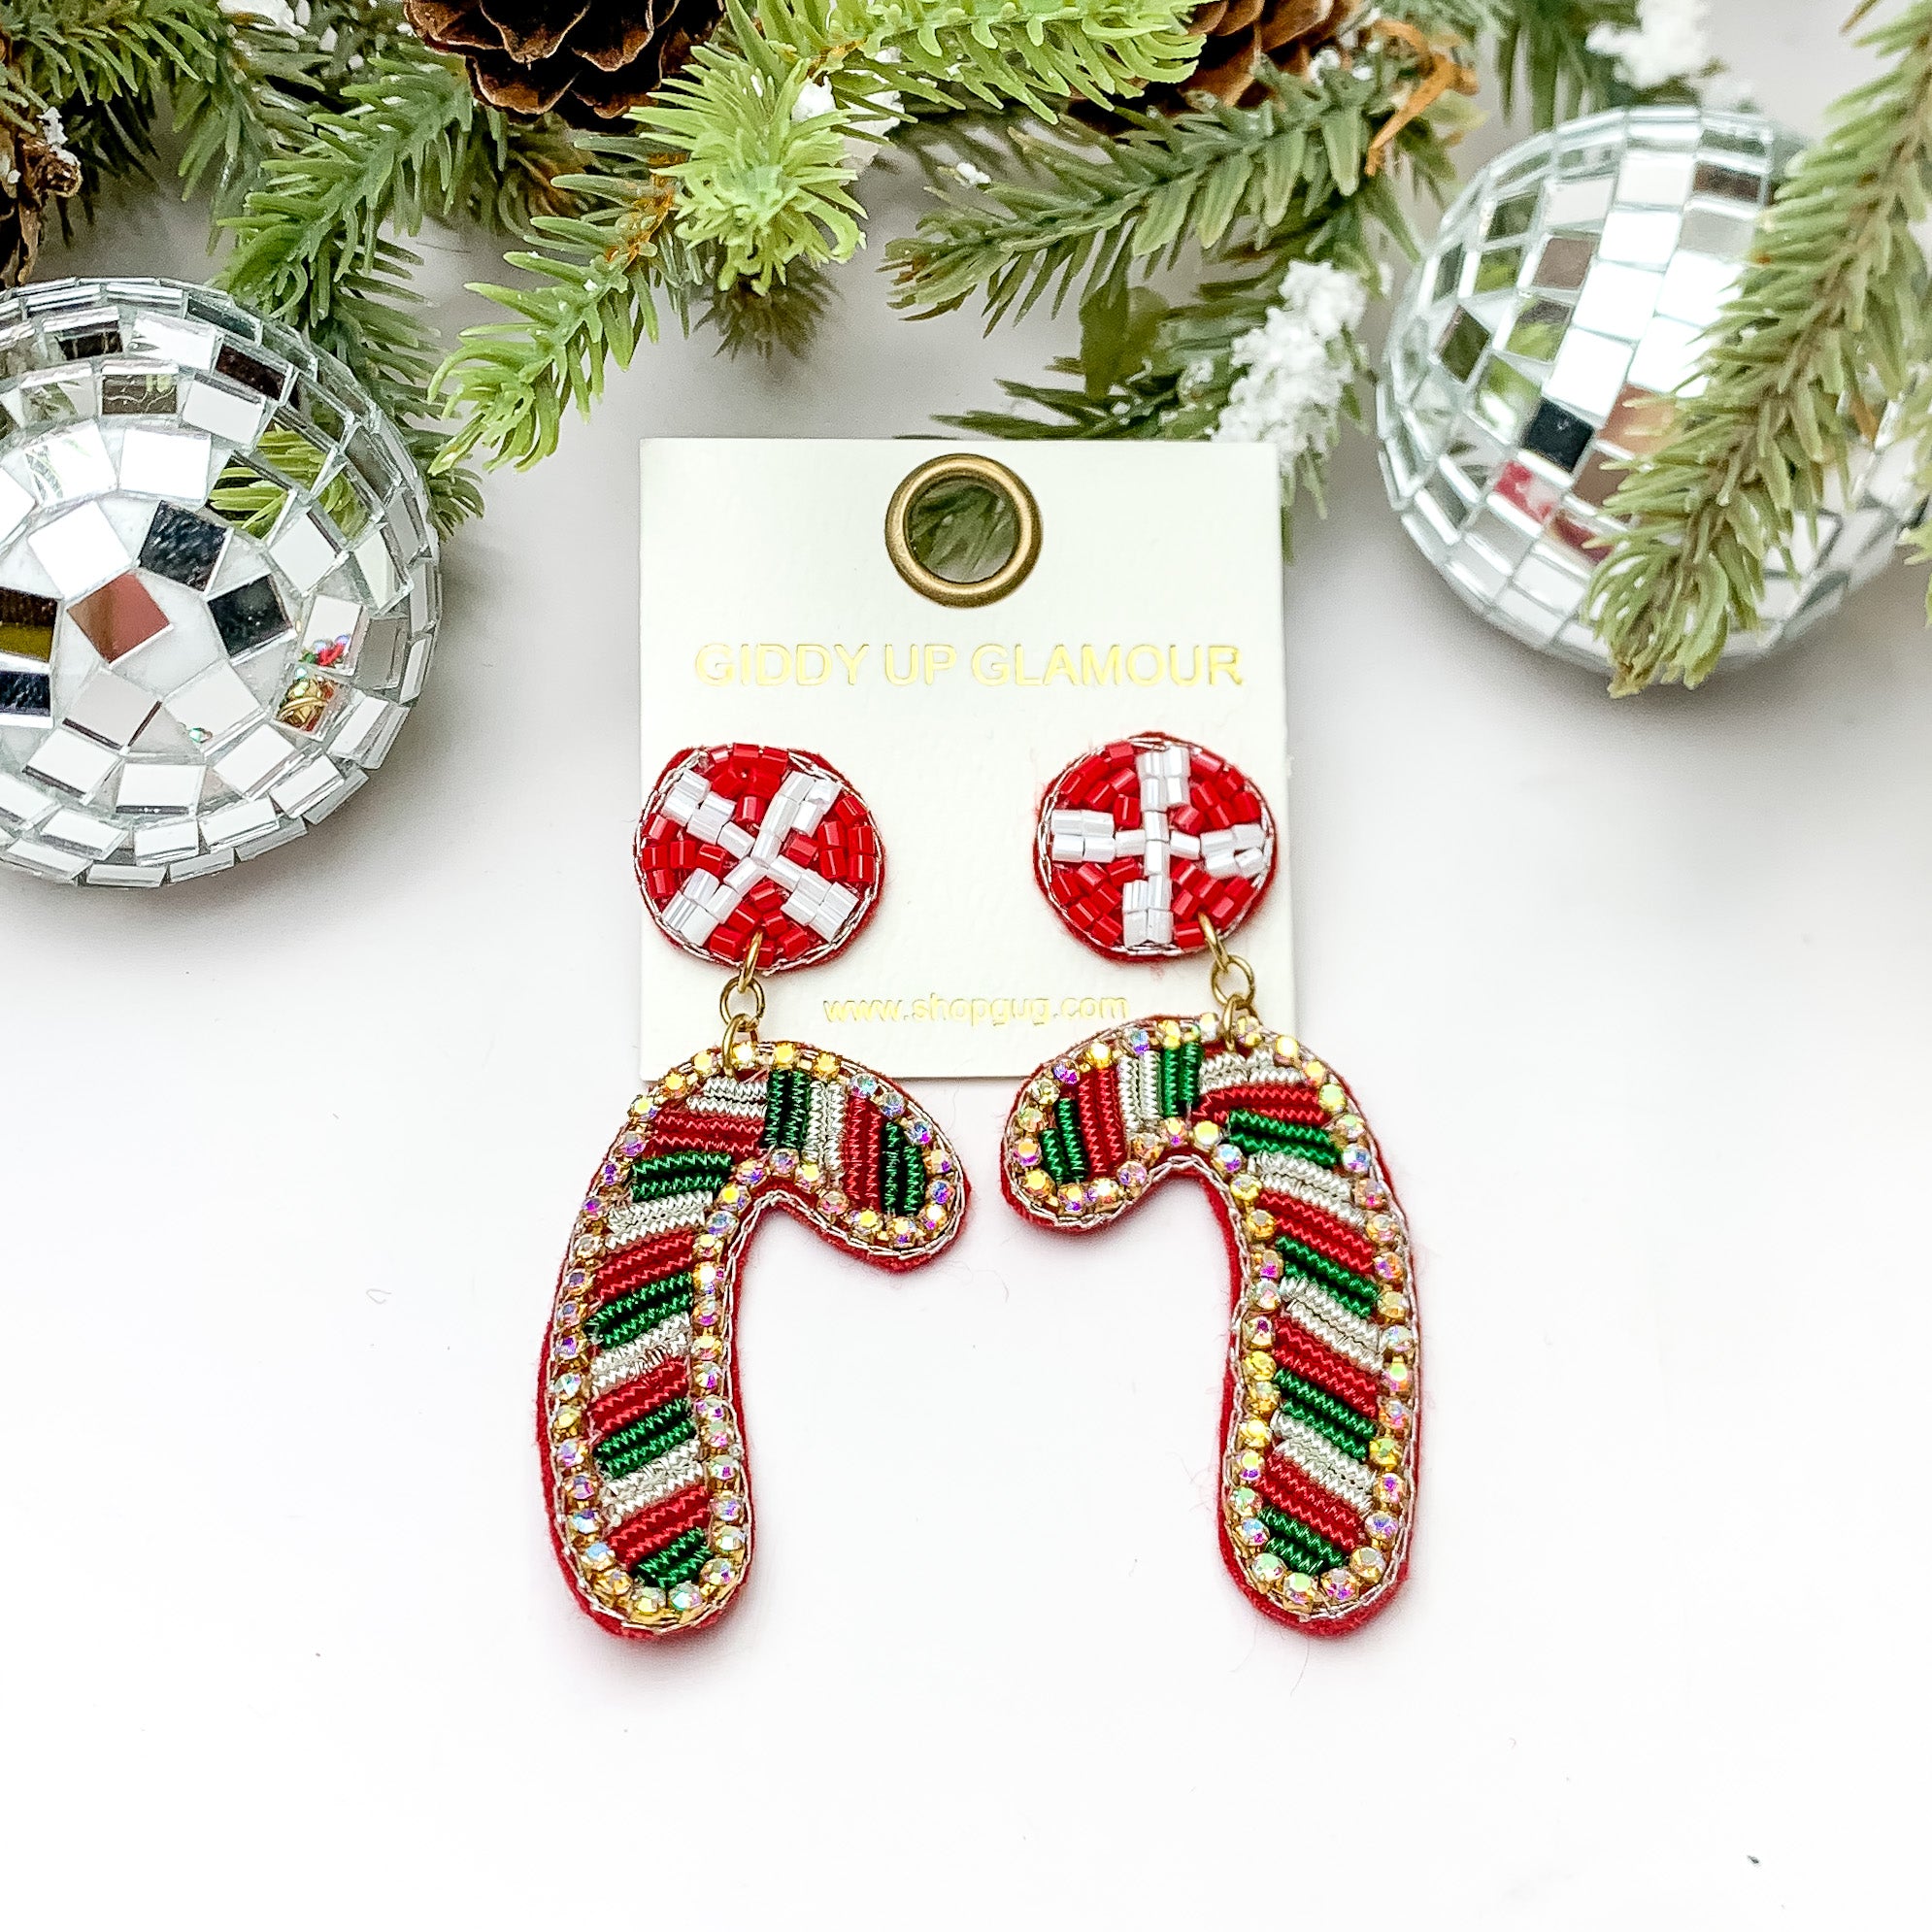 Candy Cane Drop Earrings with AB Crystal Outline in Red and Green - Giddy Up Glamour Boutique